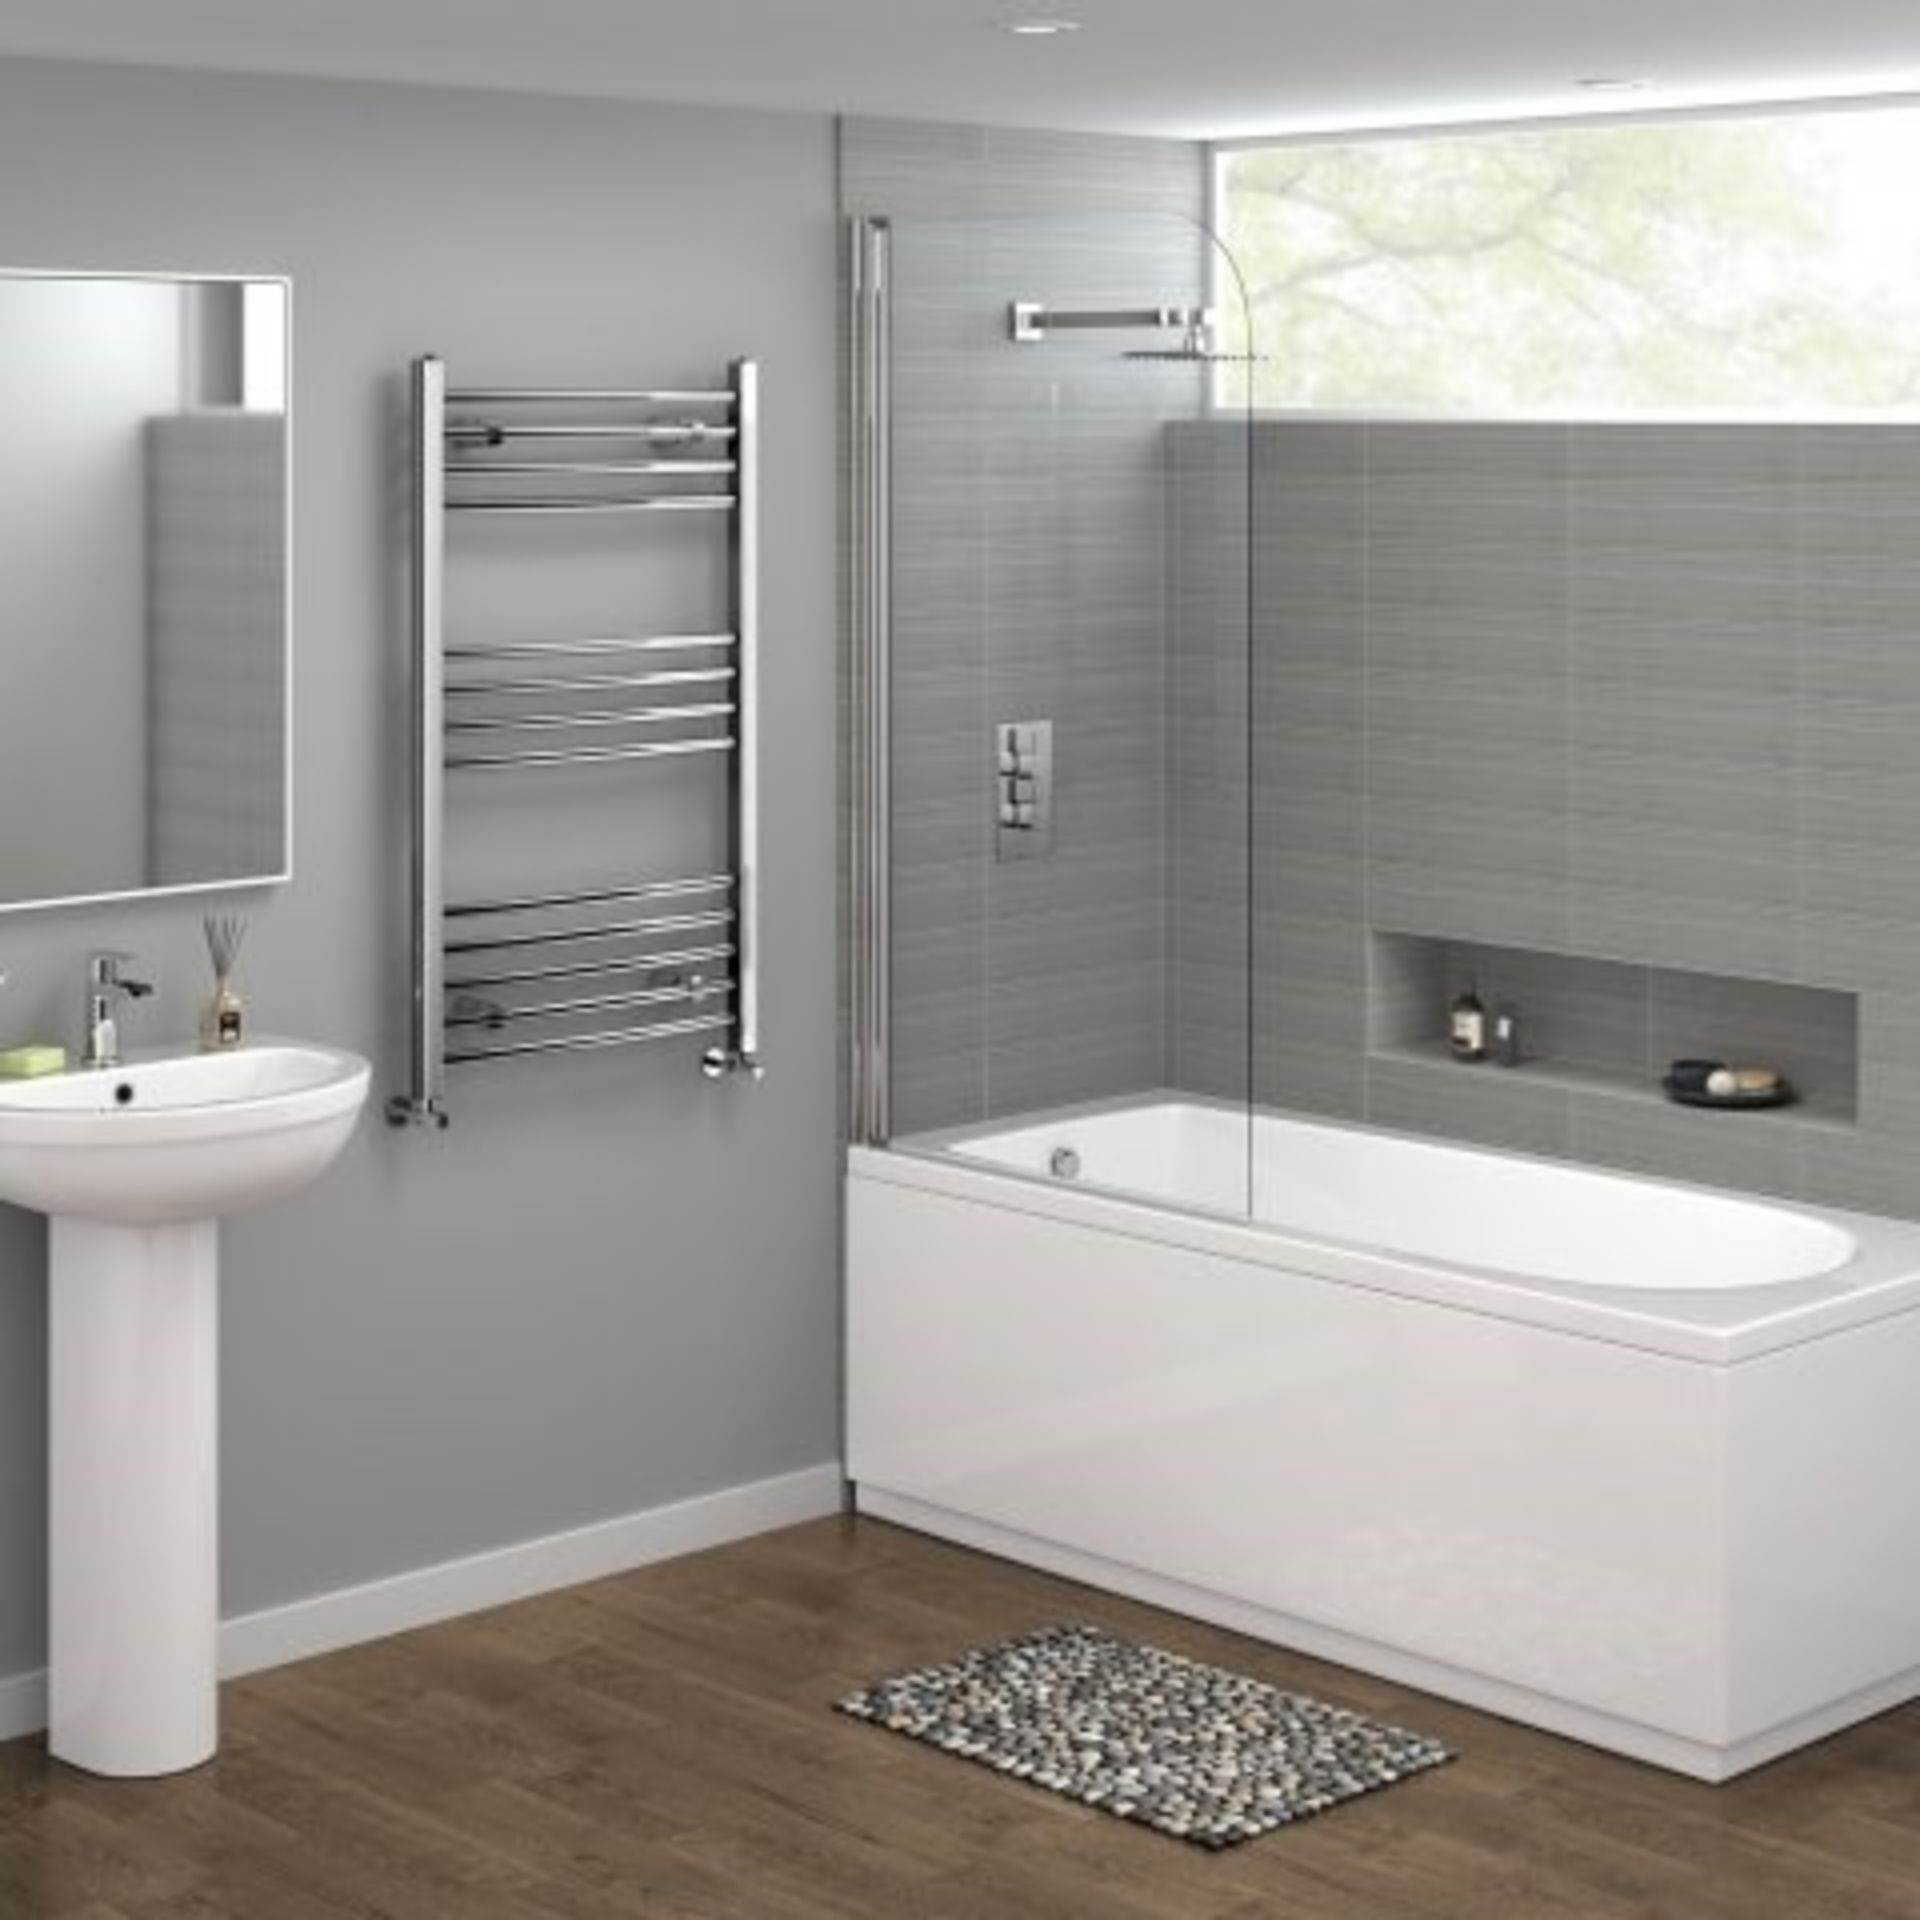 New 1200x500mm - 20mm Tubes - RRP £219.99.Chrome Curved Rail Ladder Towel Radiator.Our Nancy - Image 2 of 2